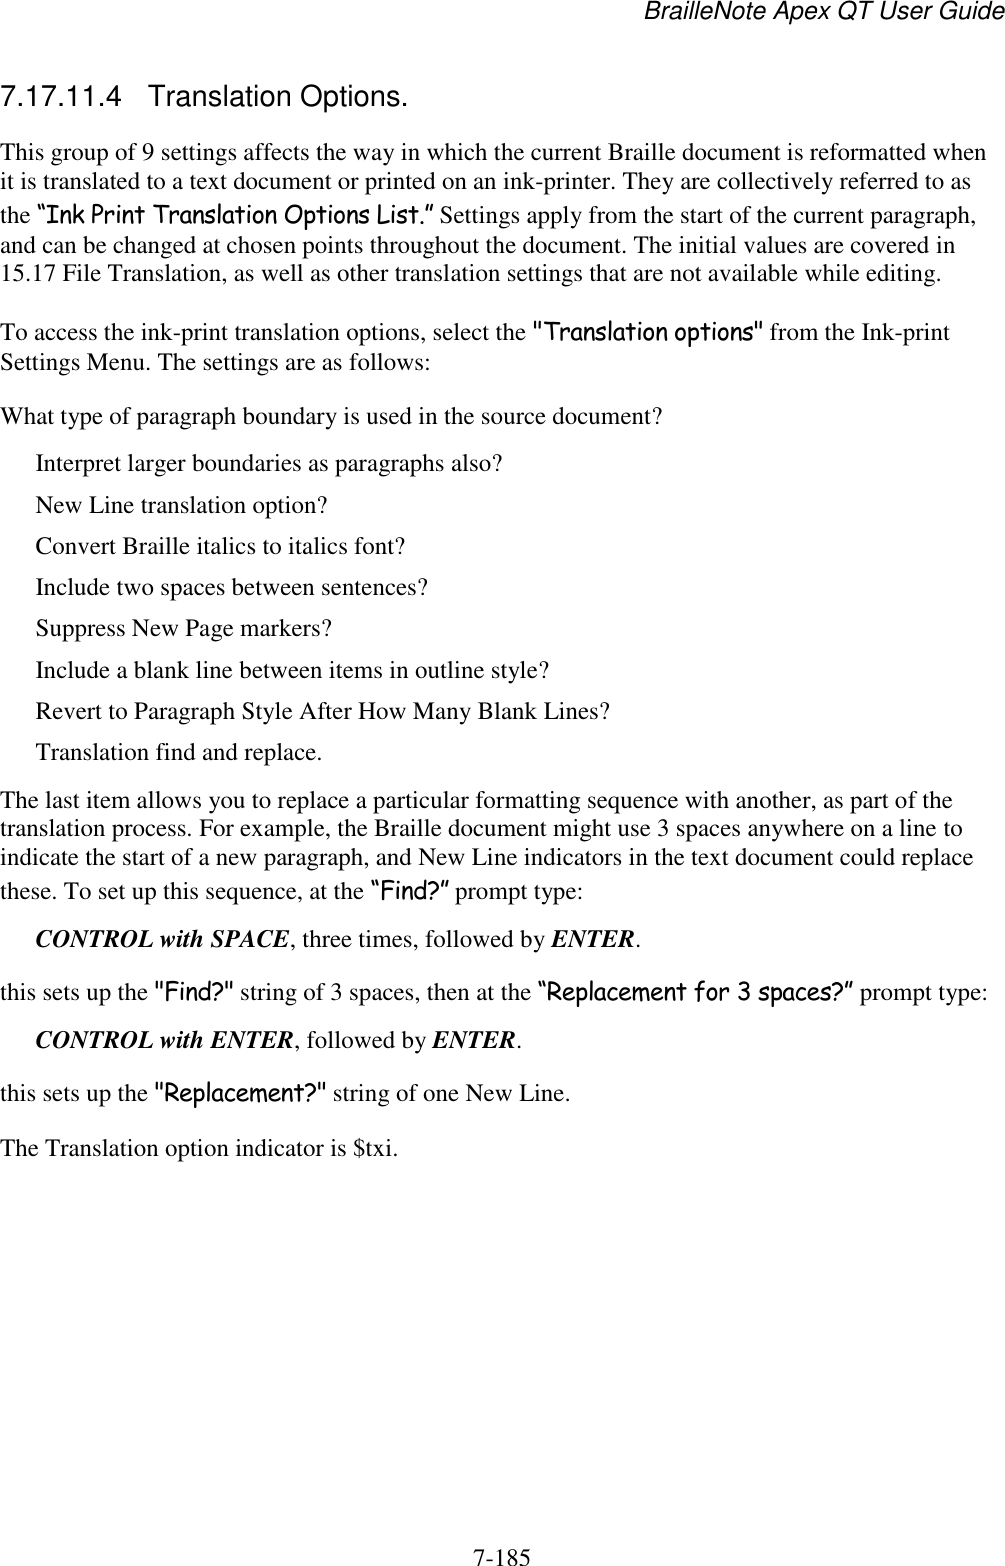 BrailleNote Apex QT User Guide  7-185   7.17.11.4  Translation Options. This group of 9 settings affects the way in which the current Braille document is reformatted when it is translated to a text document or printed on an ink-printer. They are collectively referred to as the “Ink Print Translation Options List.” Settings apply from the start of the current paragraph, and can be changed at chosen points throughout the document. The initial values are covered in 15.17 File Translation, as well as other translation settings that are not available while editing. To access the ink-print translation options, select the &quot;Translation options&quot; from the Ink-print Settings Menu. The settings are as follows: What type of paragraph boundary is used in the source document? Interpret larger boundaries as paragraphs also? New Line translation option? Convert Braille italics to italics font? Include two spaces between sentences? Suppress New Page markers? Include a blank line between items in outline style? Revert to Paragraph Style After How Many Blank Lines? Translation find and replace. The last item allows you to replace a particular formatting sequence with another, as part of the translation process. For example, the Braille document might use 3 spaces anywhere on a line to indicate the start of a new paragraph, and New Line indicators in the text document could replace these. To set up this sequence, at the “Find?” prompt type: CONTROL with SPACE, three times, followed by ENTER. this sets up the &quot;Find?&quot; string of 3 spaces, then at the “Replacement for 3 spaces?” prompt type: CONTROL with ENTER, followed by ENTER. this sets up the &quot;Replacement?&quot; string of one New Line. The Translation option indicator is $txi.    